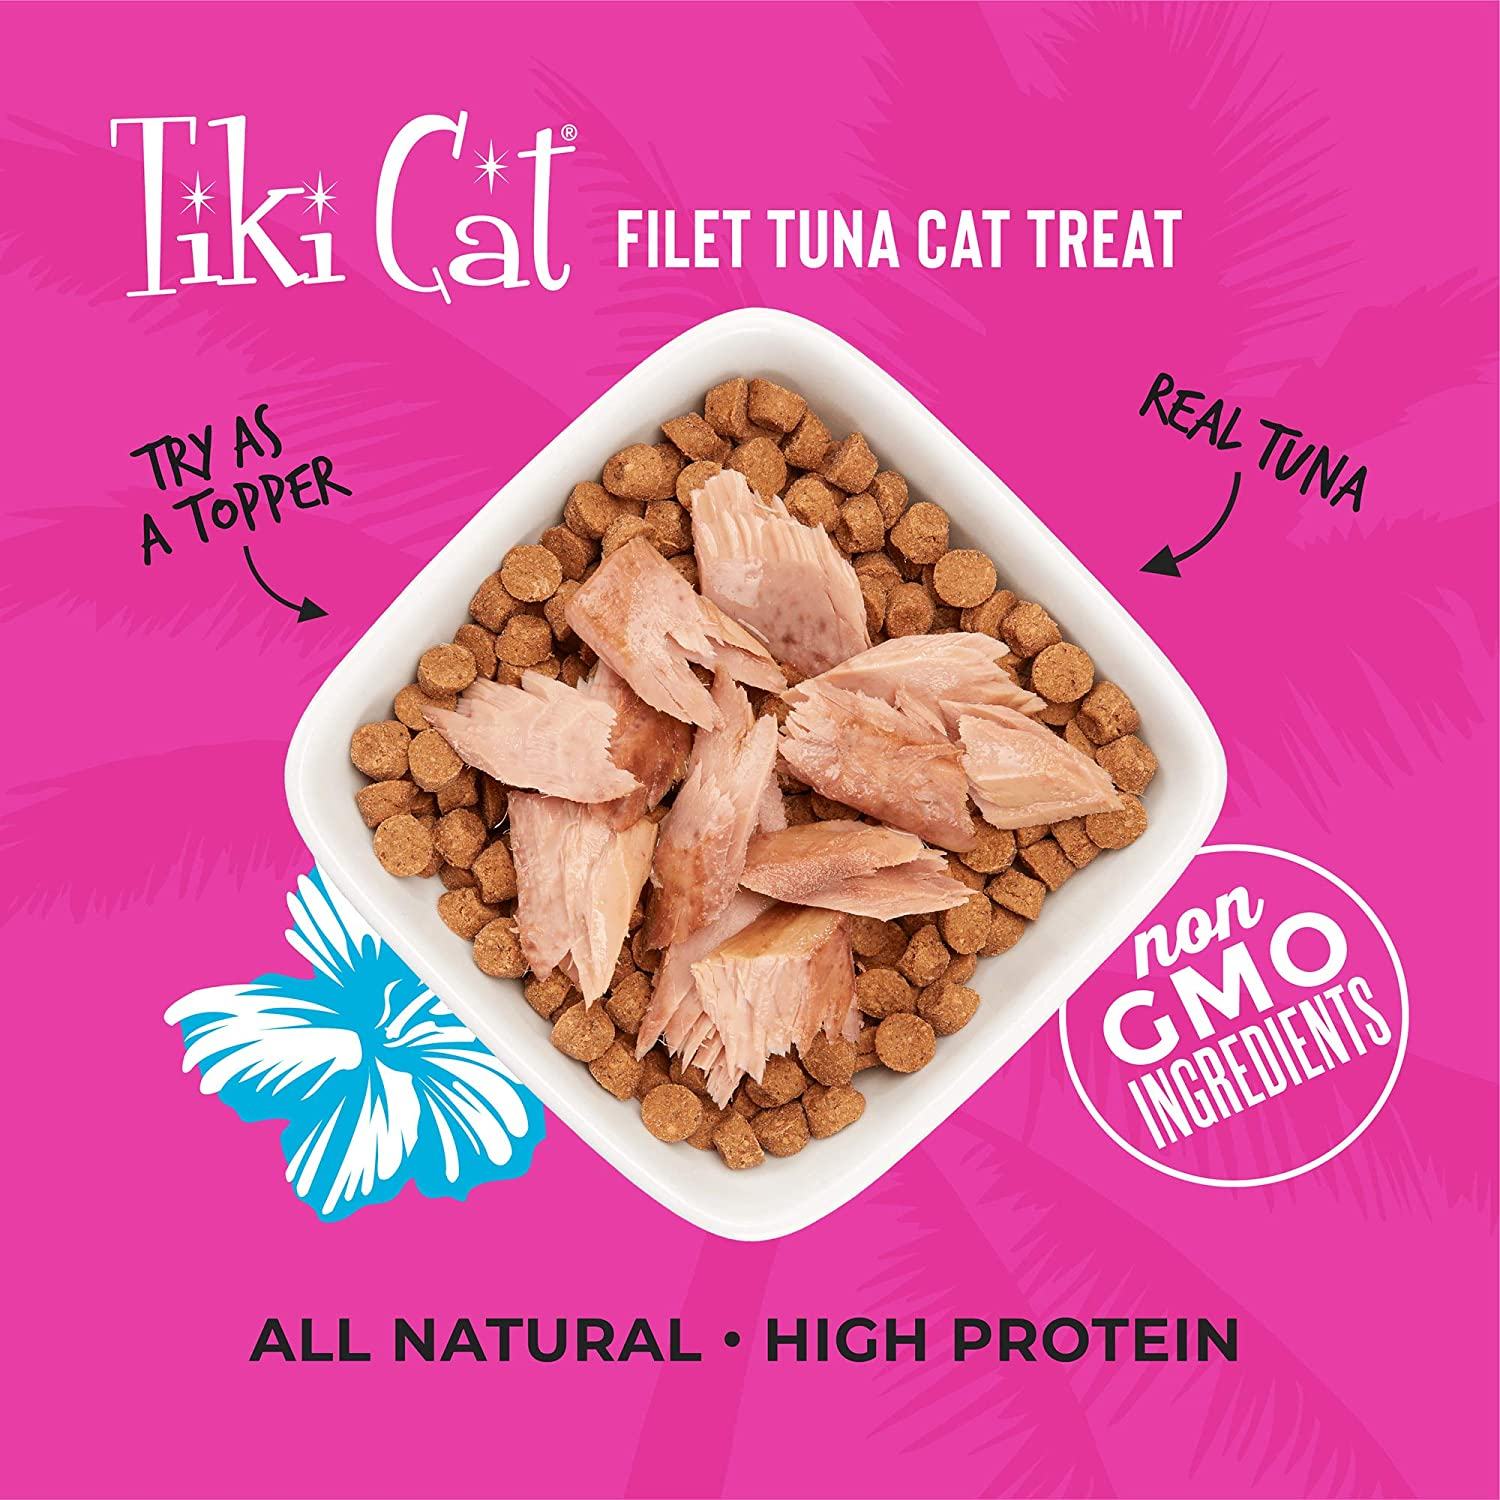 Tiki Cat Tuna Filet Cat Food Toppers and Crunchers - 1 oz Pouches - Case of 12  